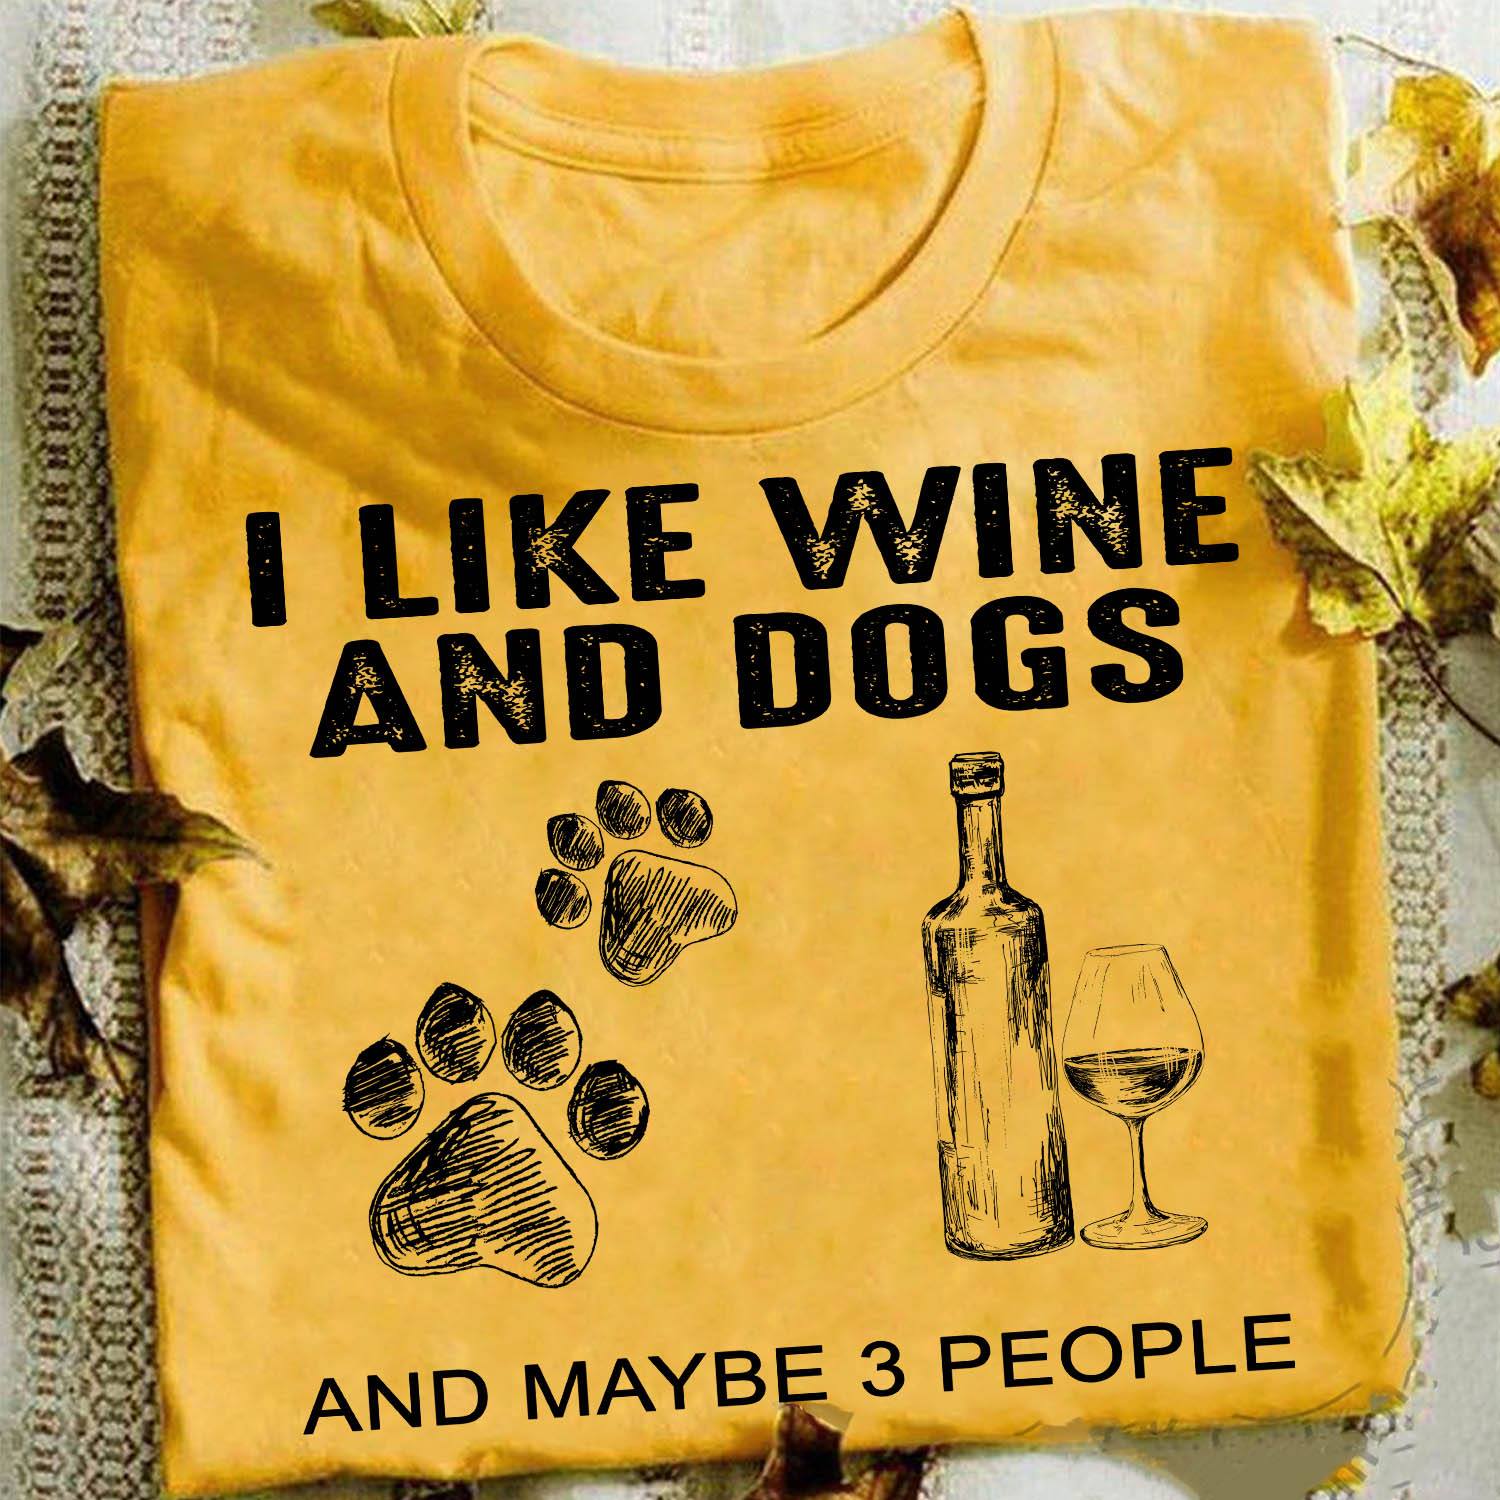 I like wine and dogs and maybe 3 people